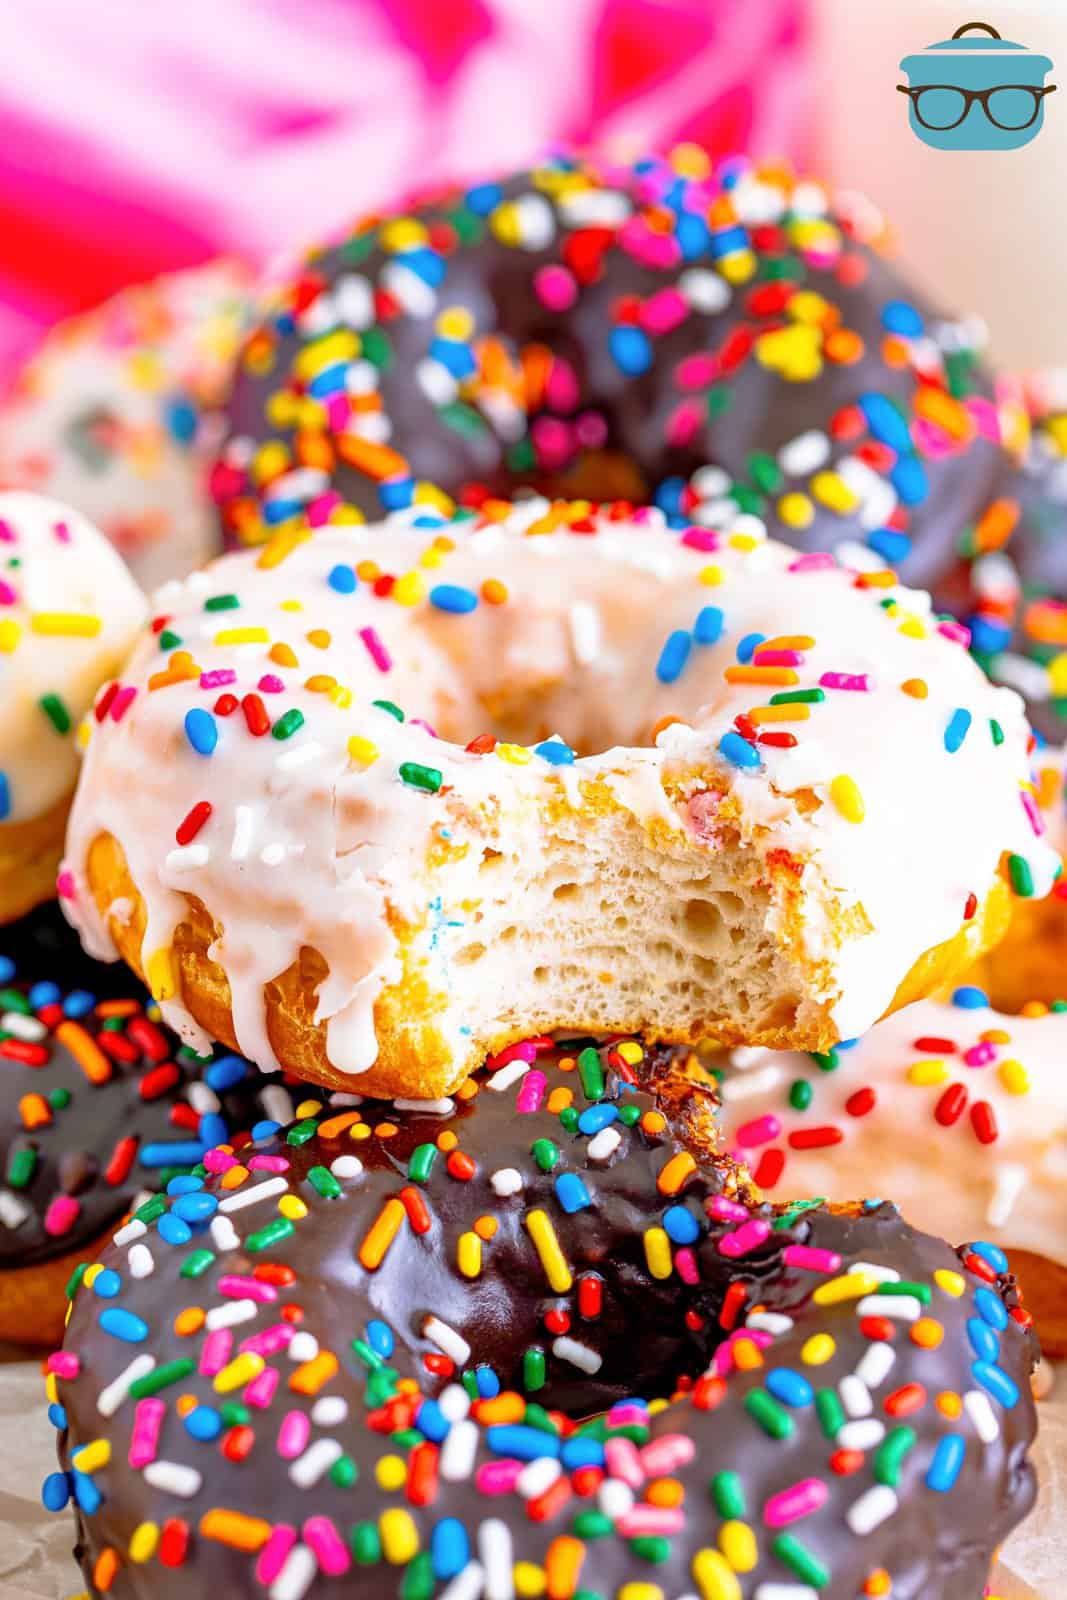 A vanilla frosted donut with a bite taken out surrounded by a few other chocolate frosted donuts. 